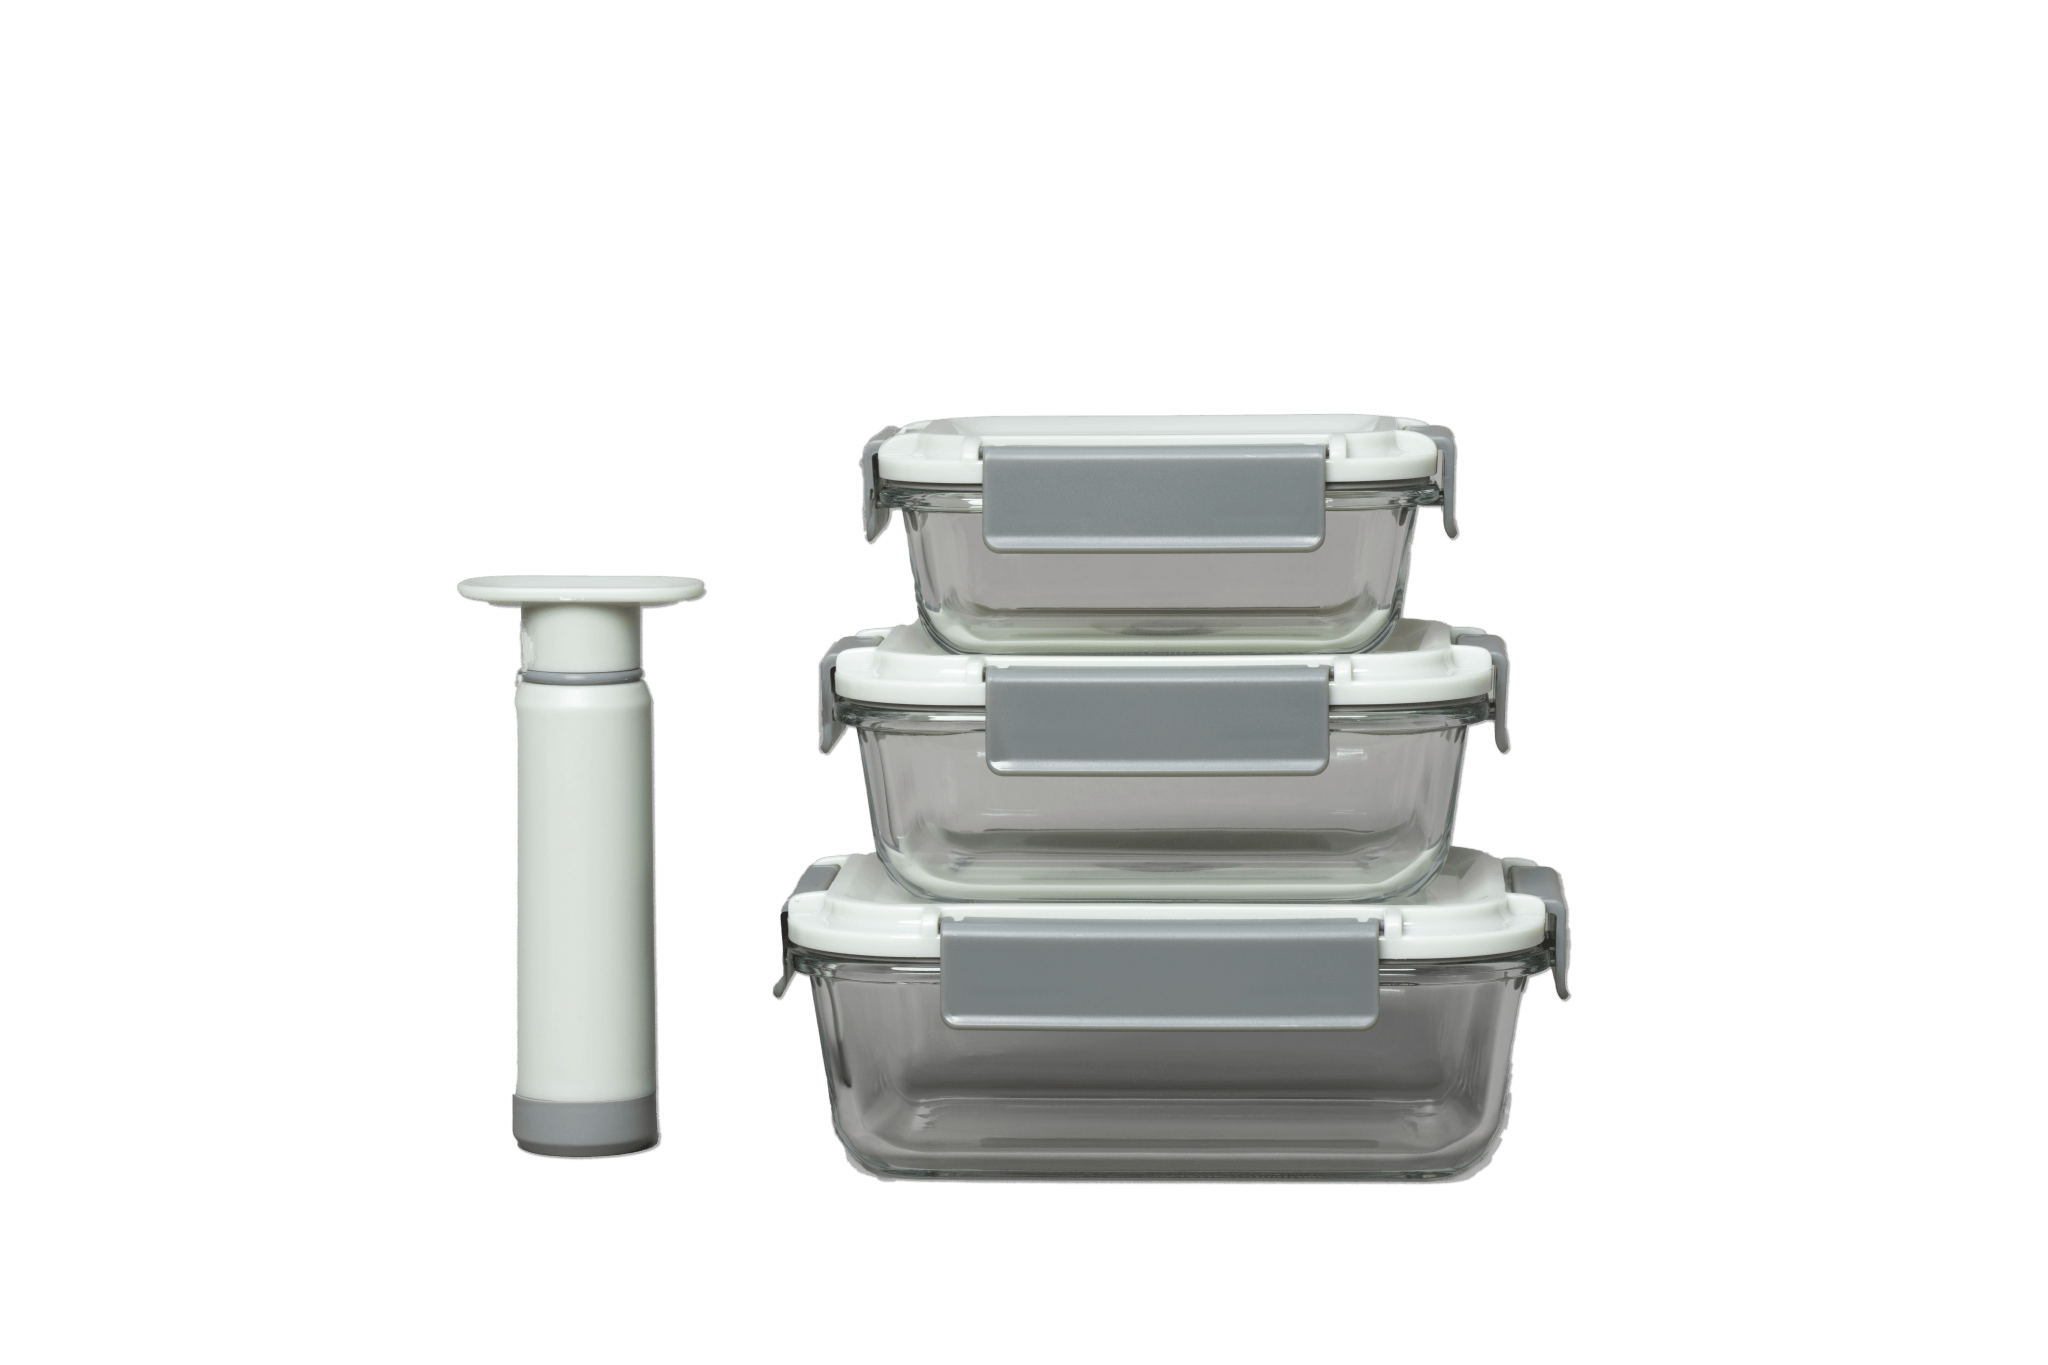 Genicook GENI-FRESH Vacuum Sealable Glass Container and Manual Pump, Set of 3, Grey, Kitchen Accessories